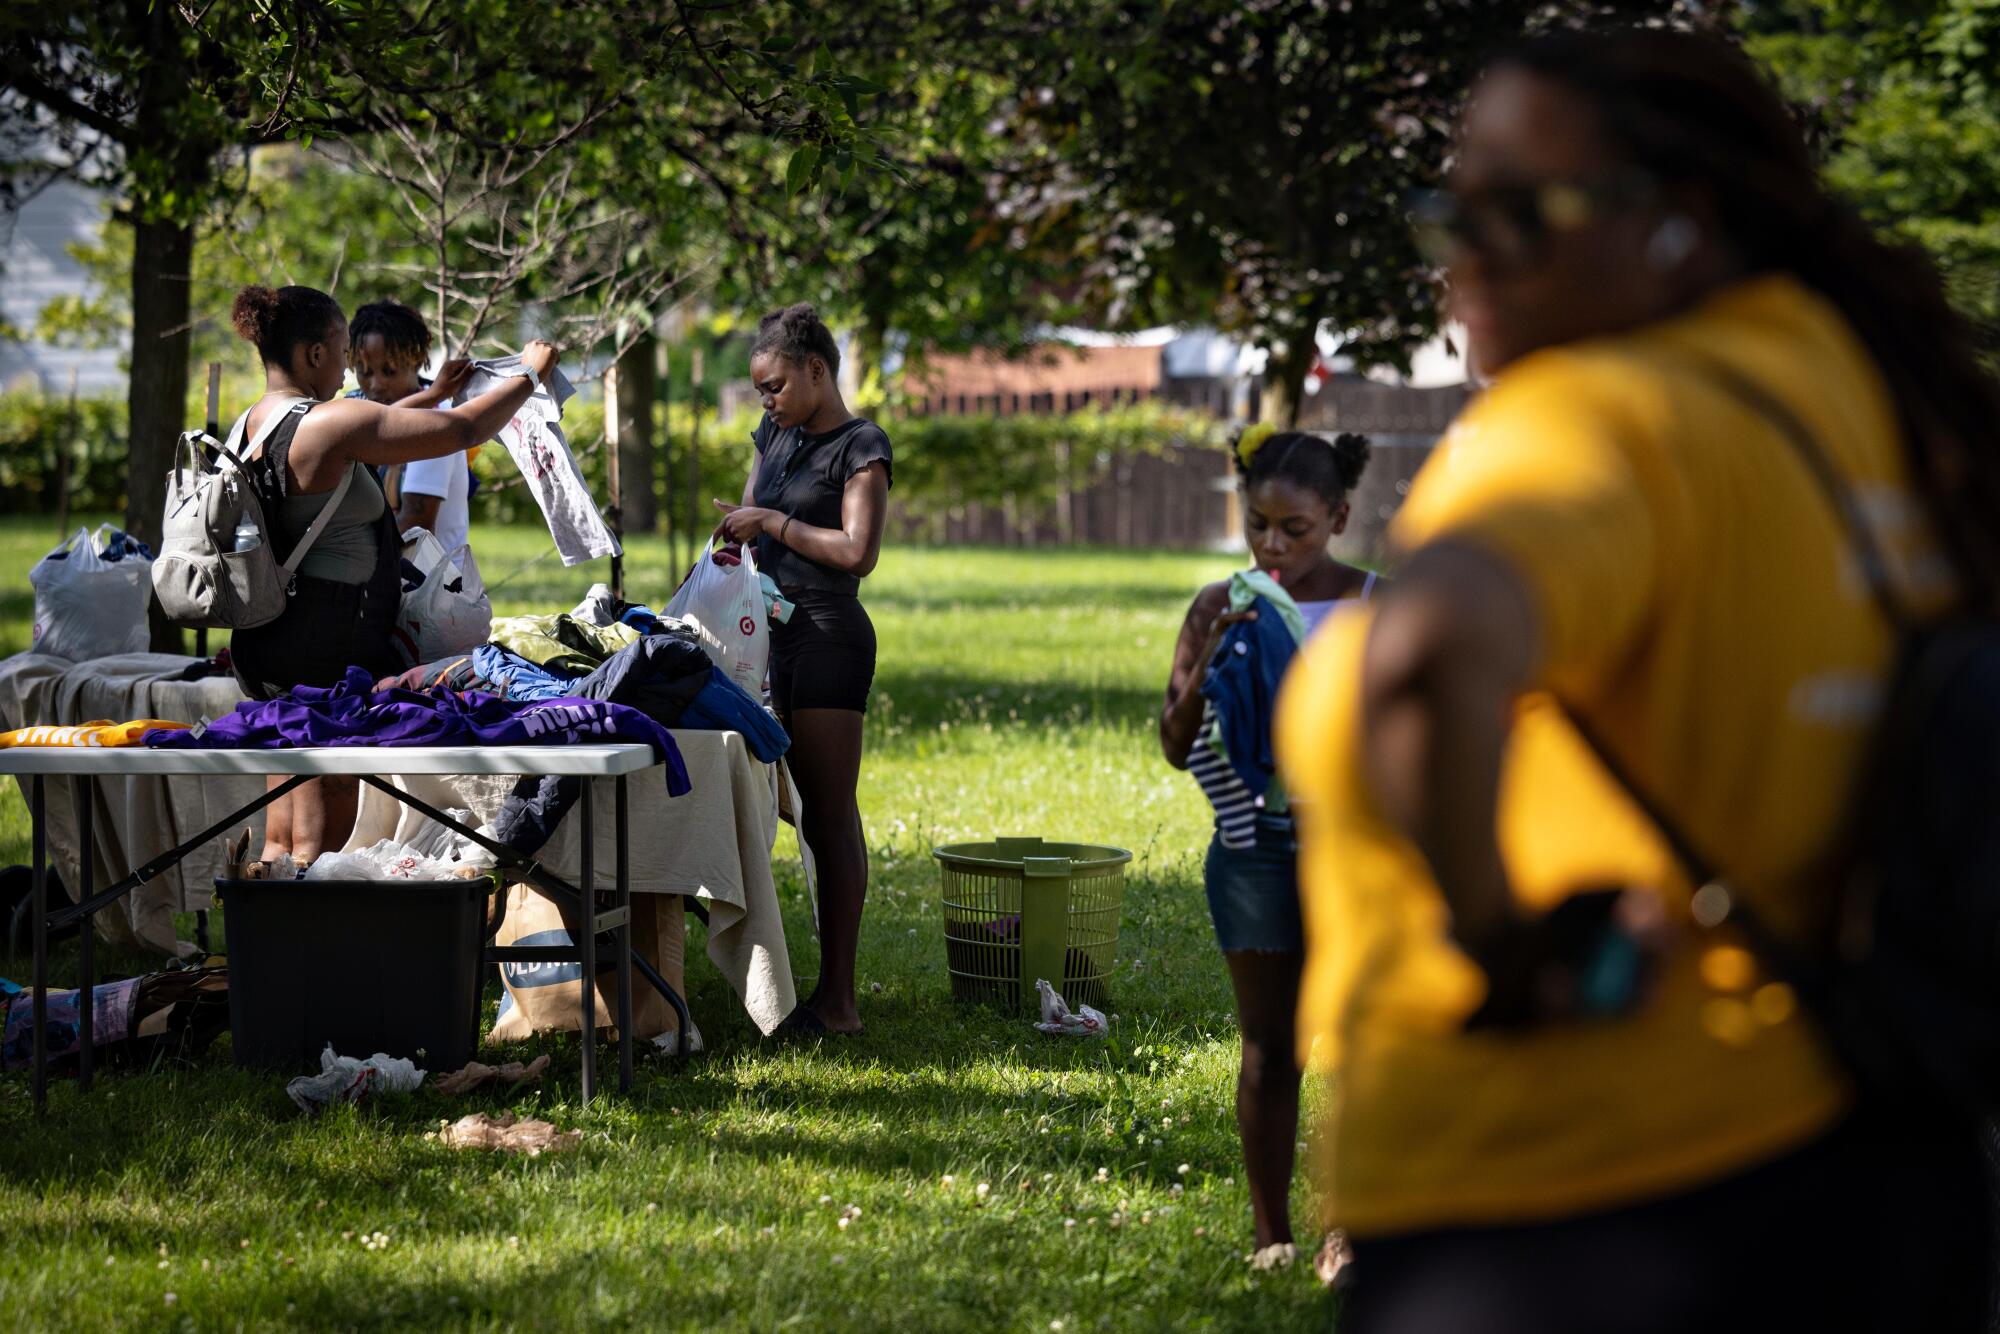 Community members get free clothes at the Milwaukee Childcare Collective event.